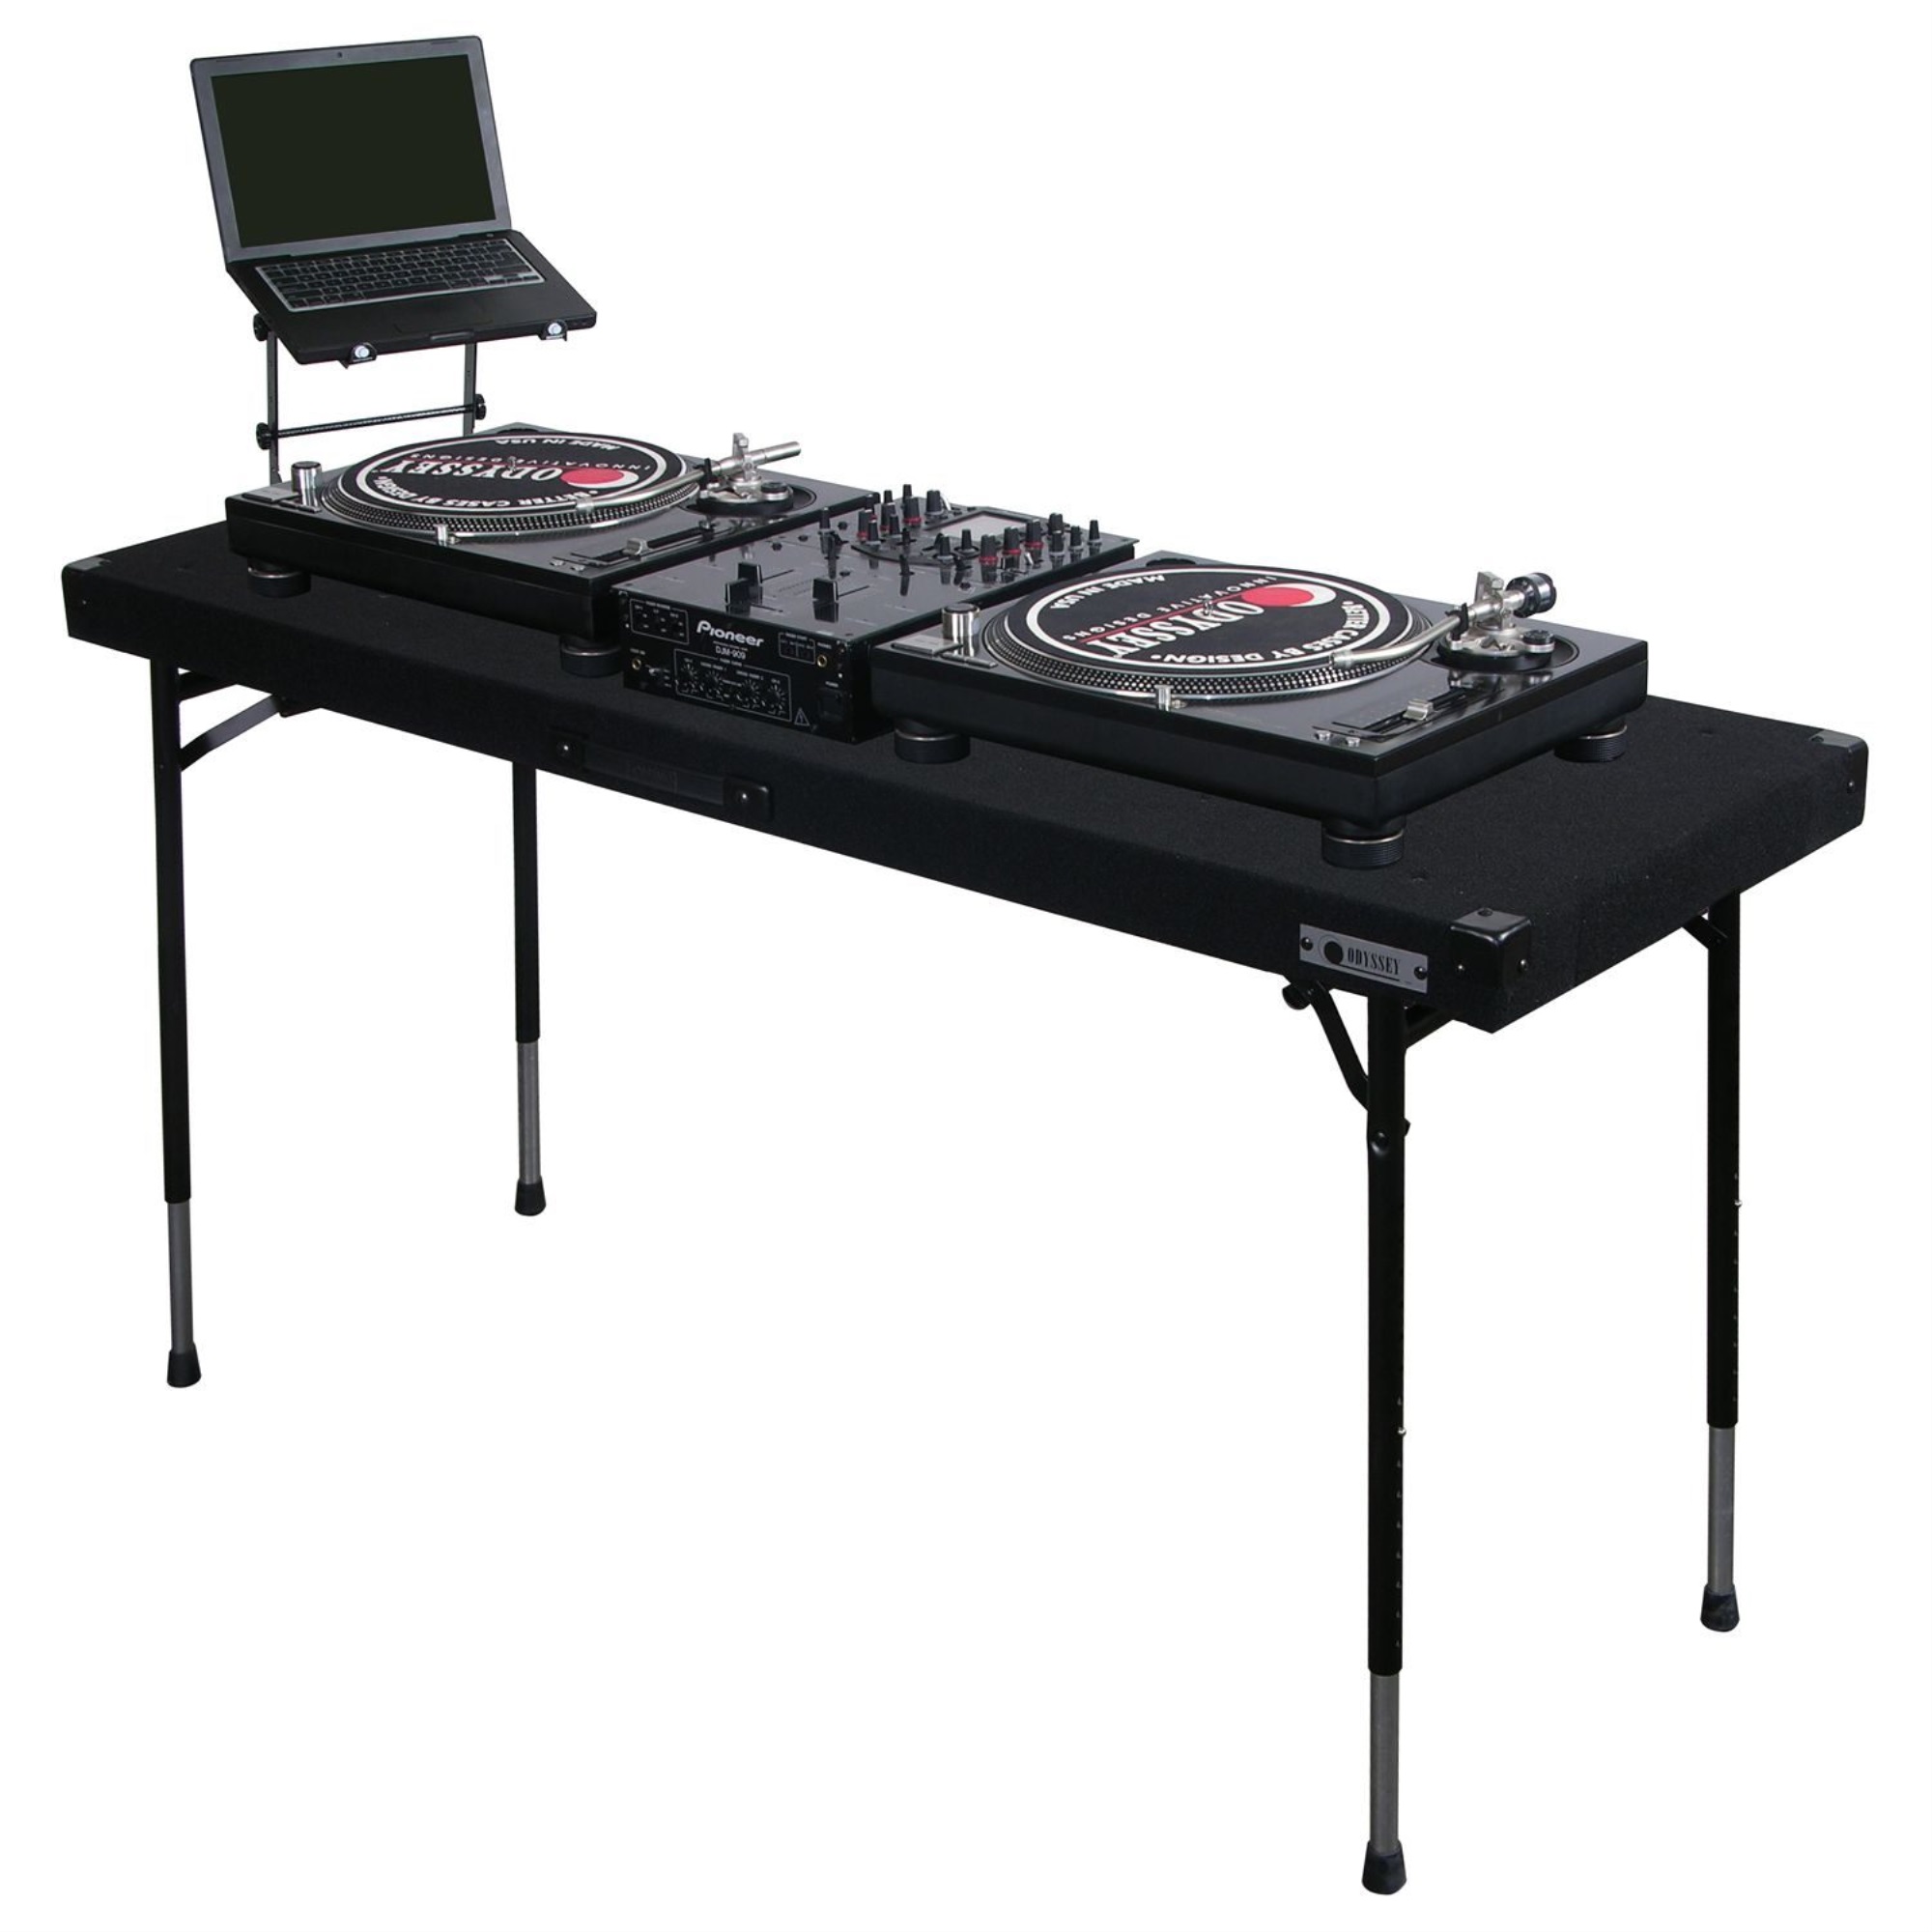 Odyssey CARPETED DJ WORK TABLE WITH ADUSTABLE LEGS